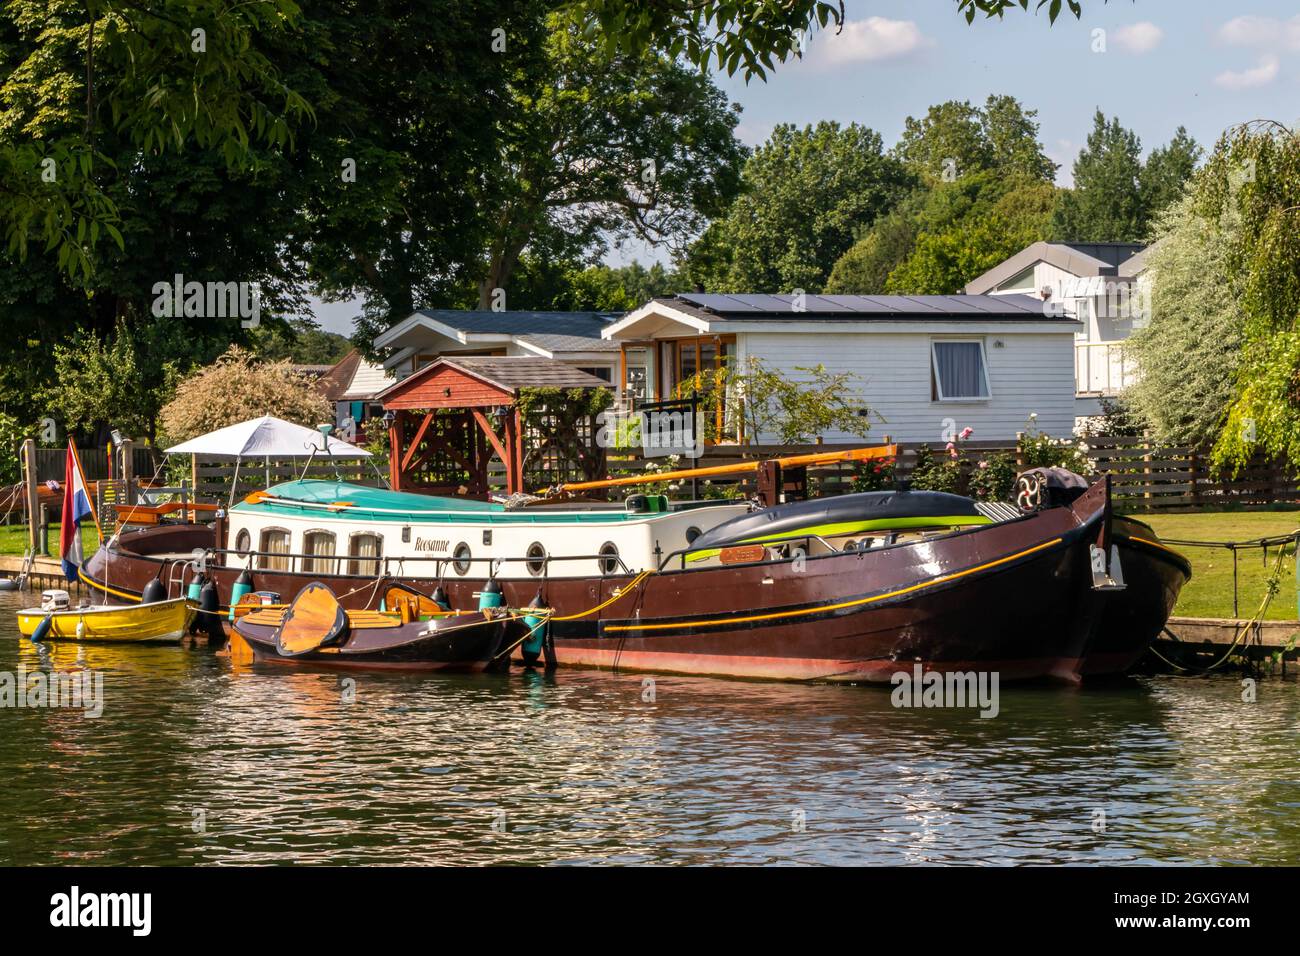 Dutch barge moored on the River Thames at Henley on Thames, Oxfordshire, England, UK Stock Photo